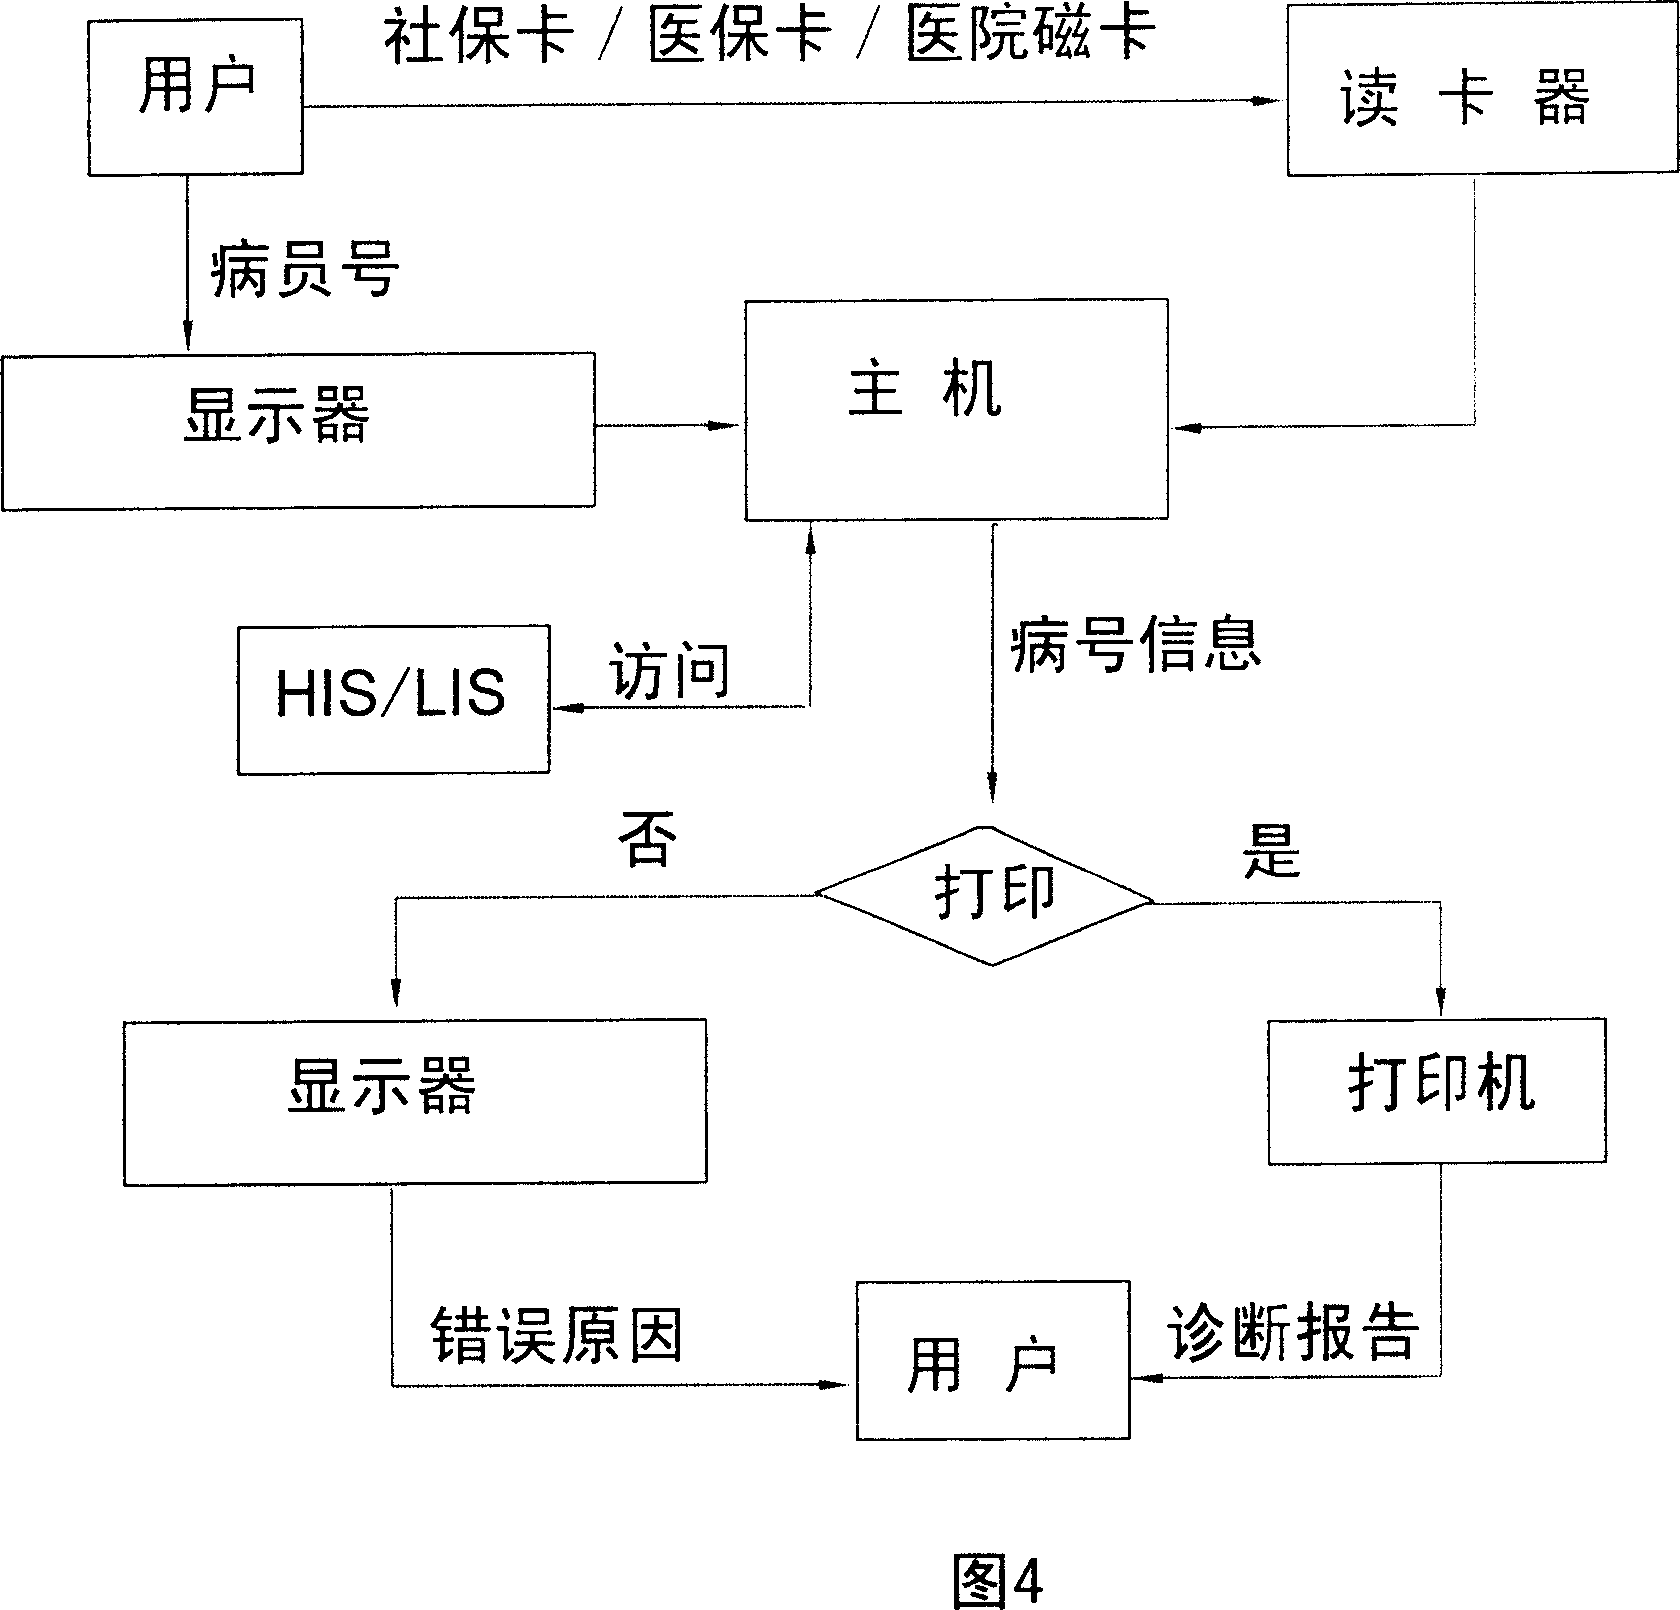 Automatic inquiring and printing method and apparatus for hospital diagnosis report